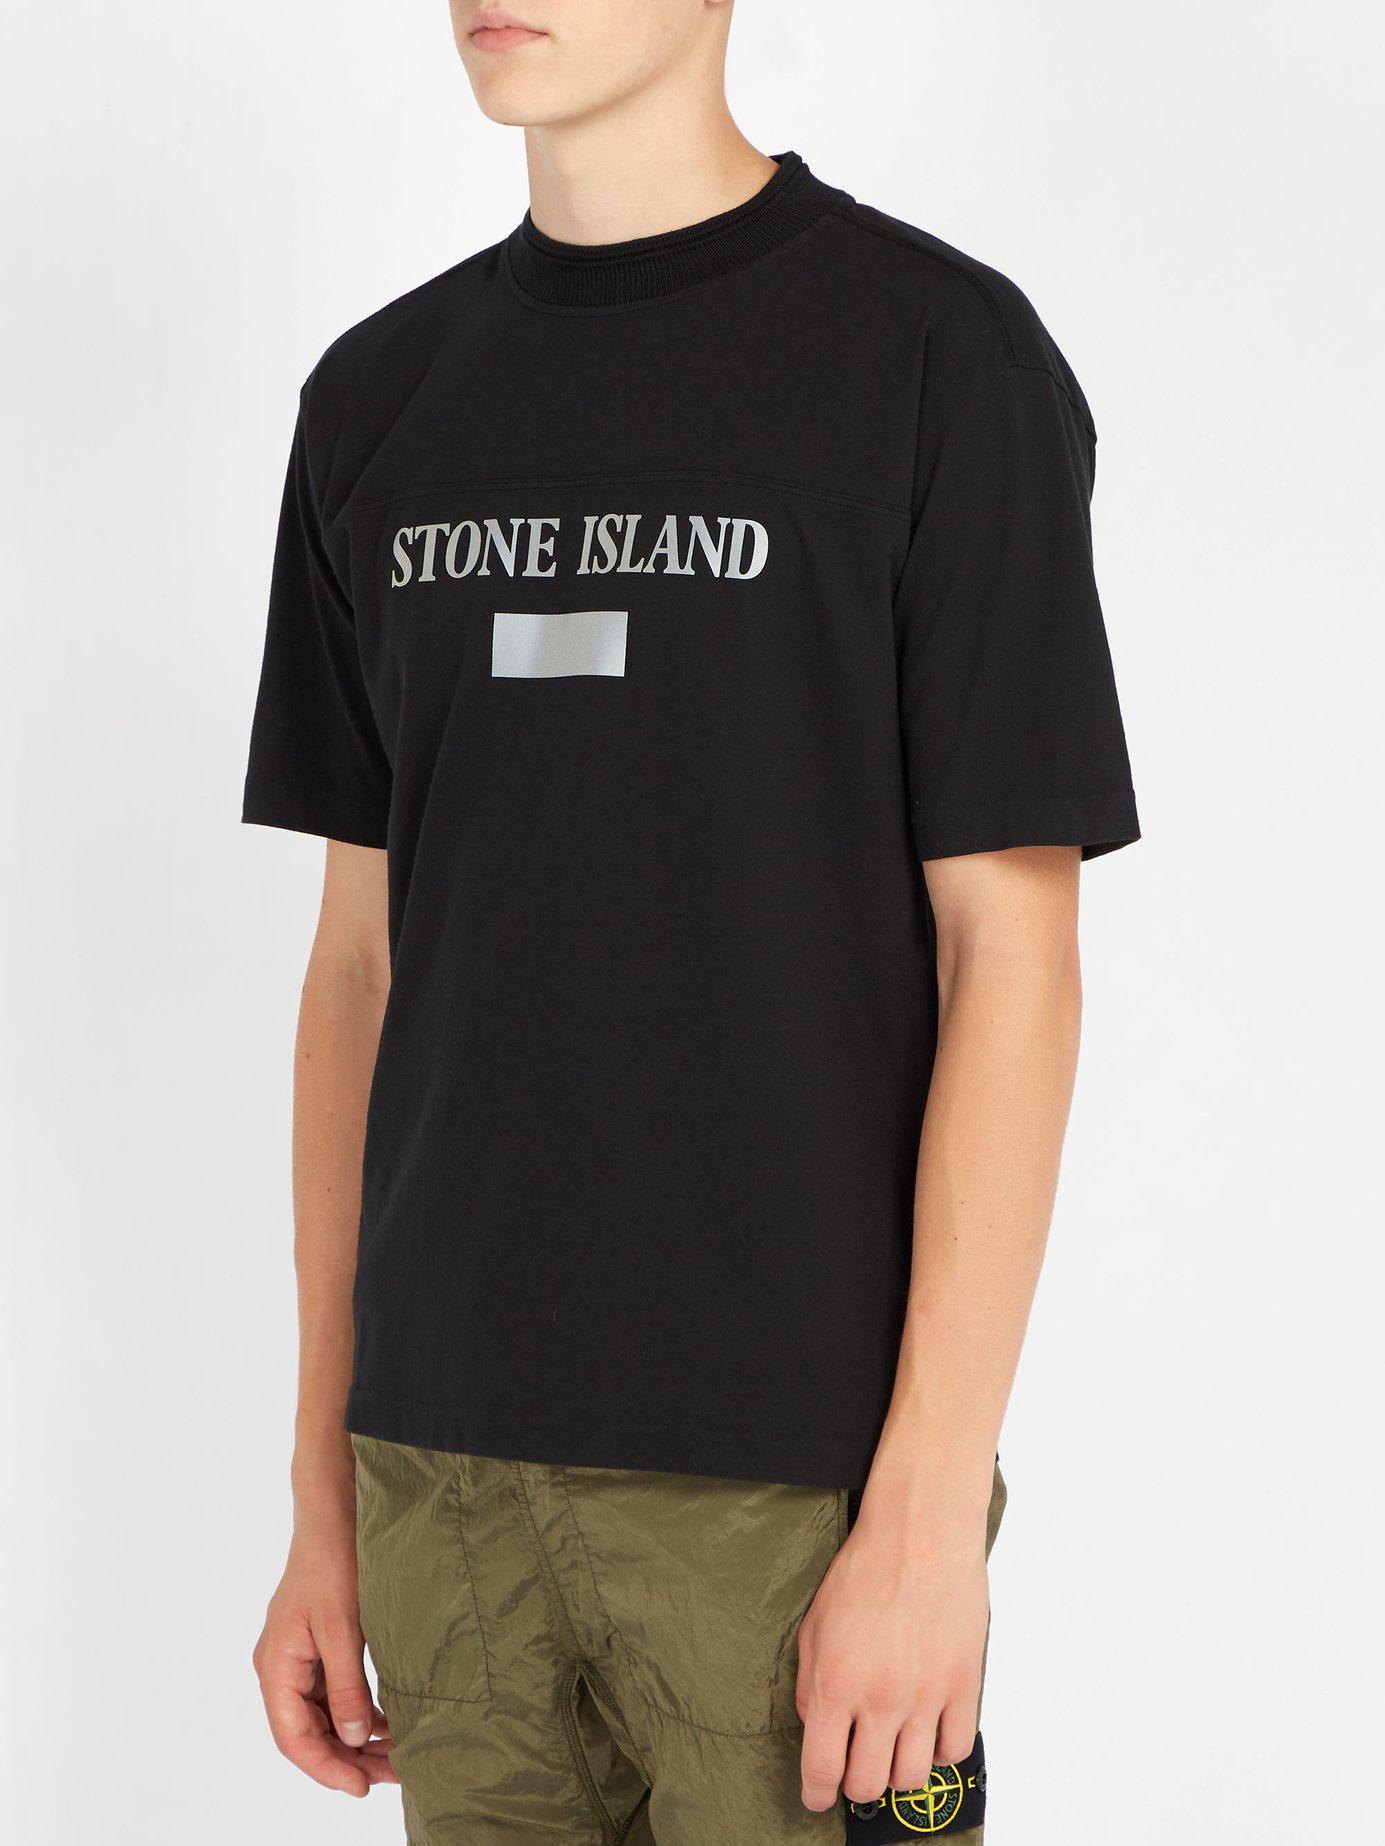 Stone Island T Shirt Reflective Portugal, SAVE 48% - aveclumiere.com